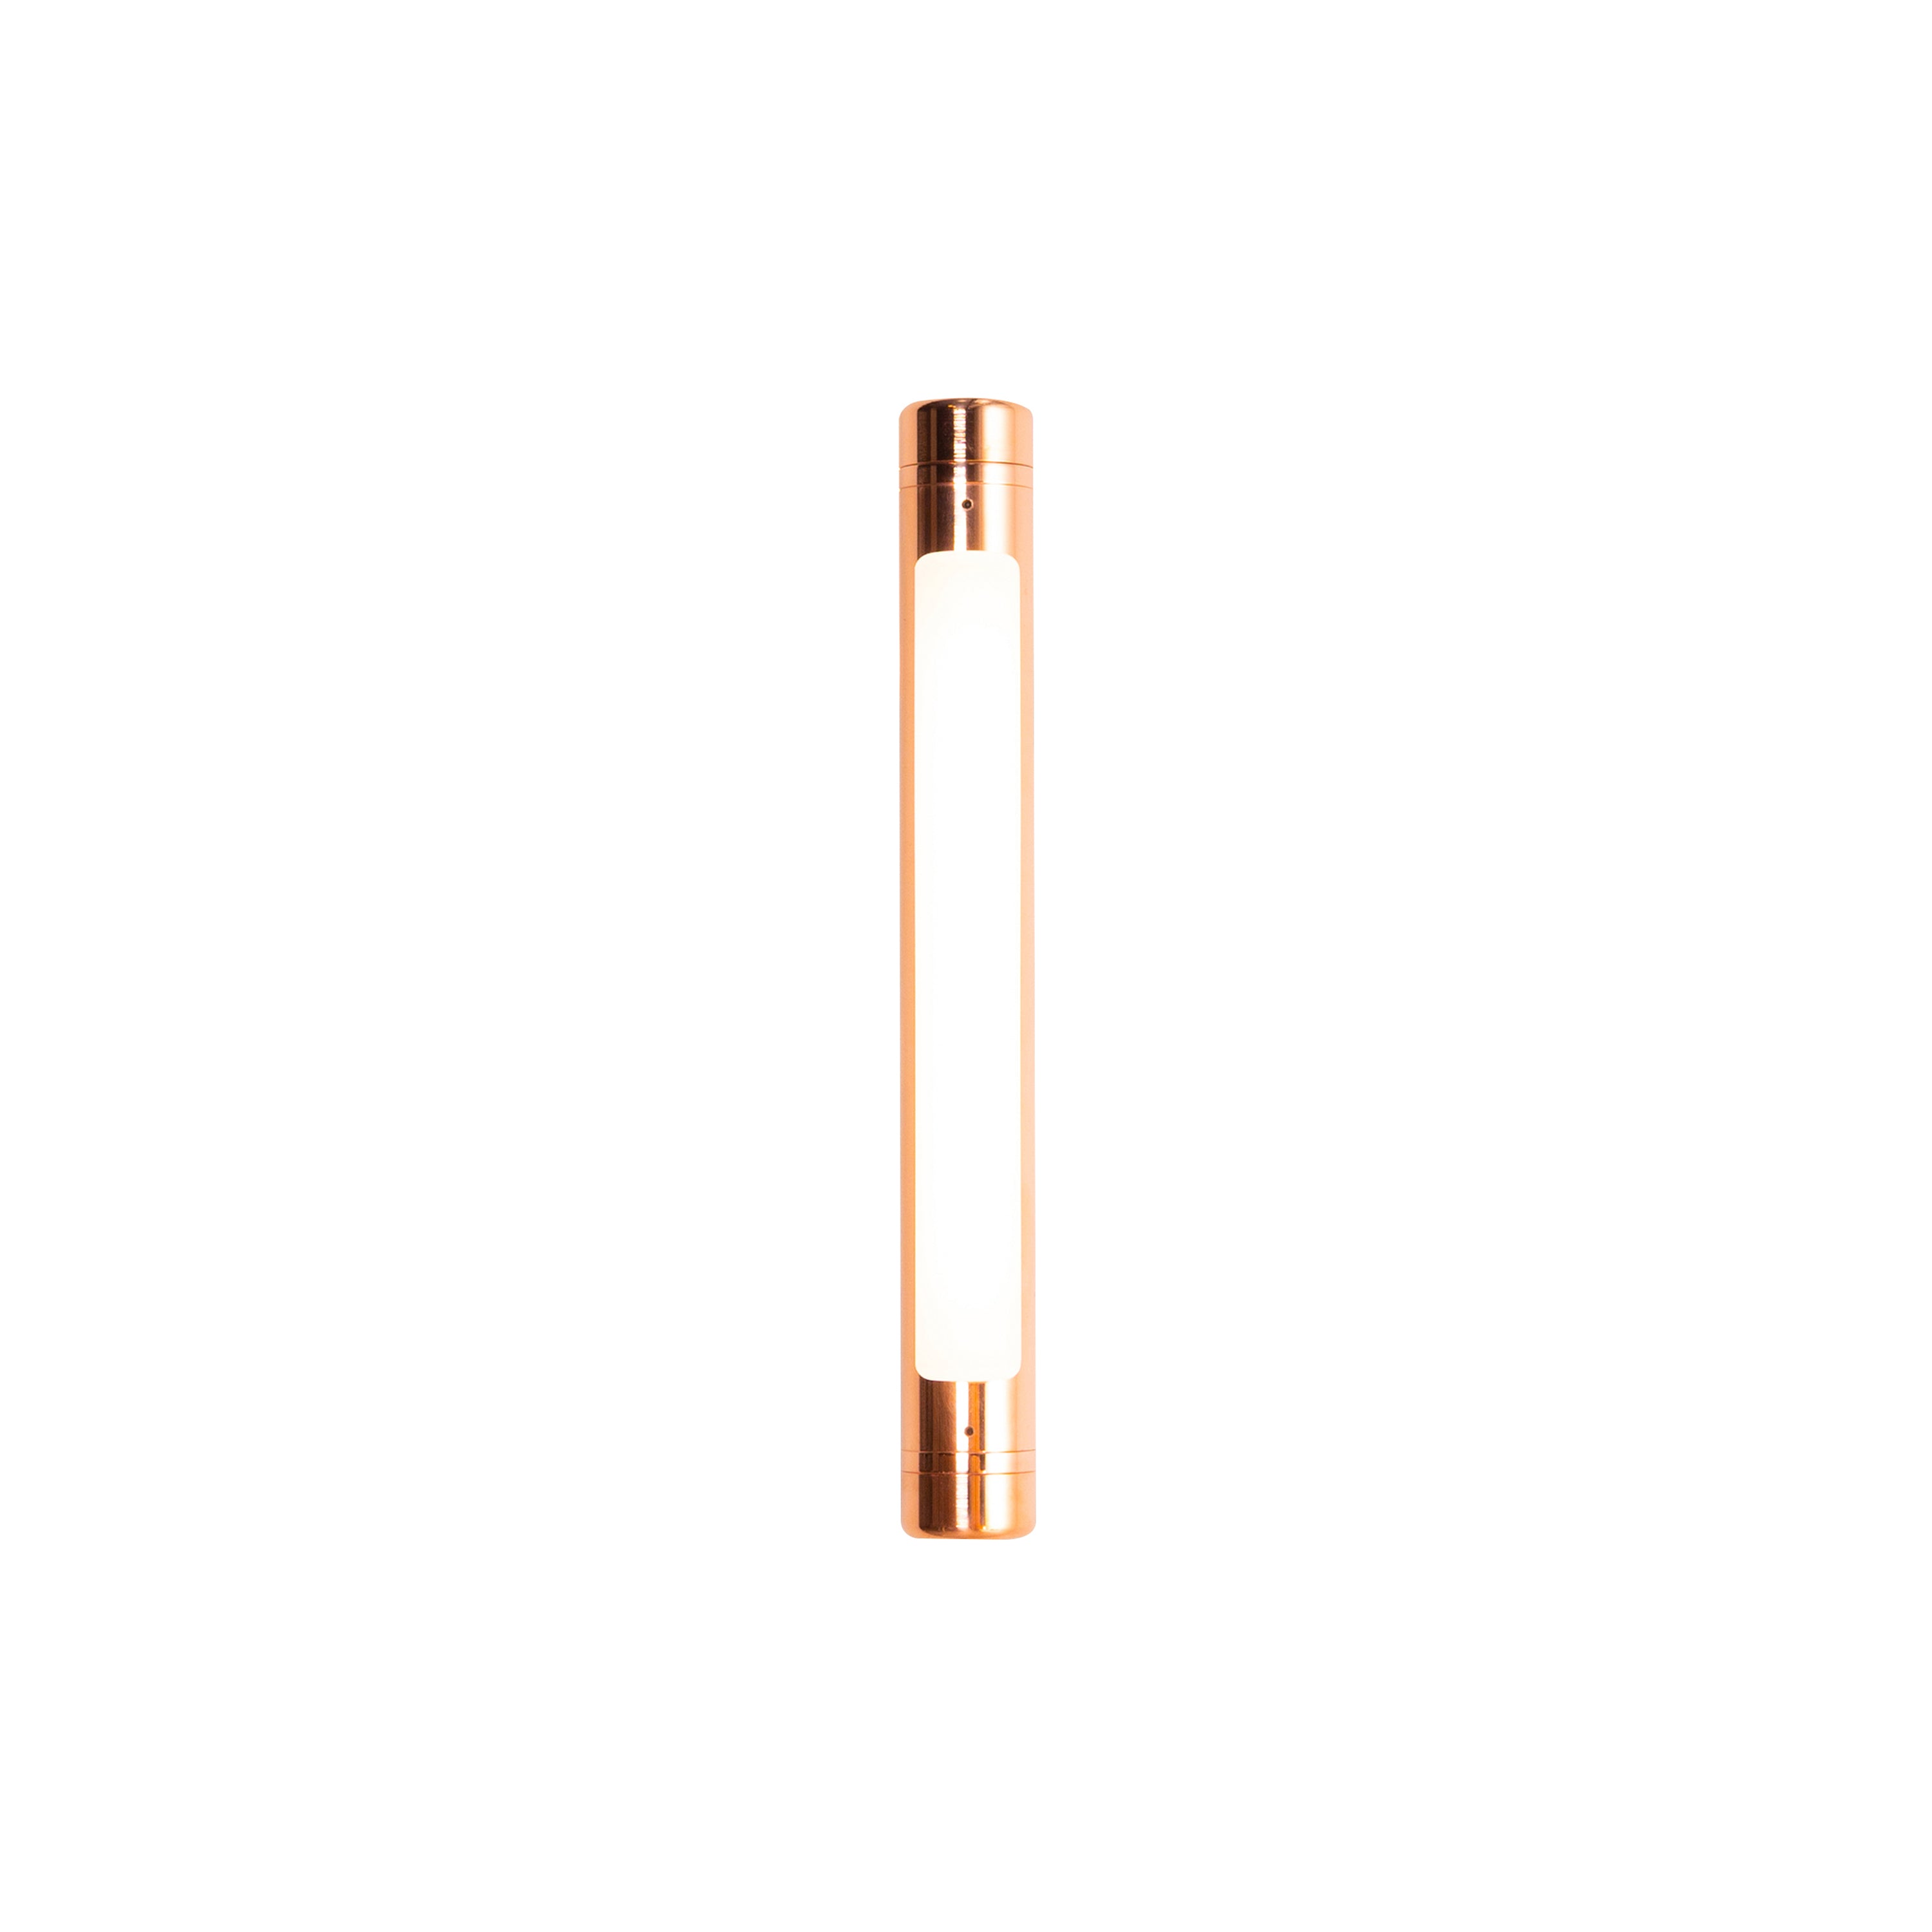 Pipeline 40 Ceiling/Wall Light: Copper